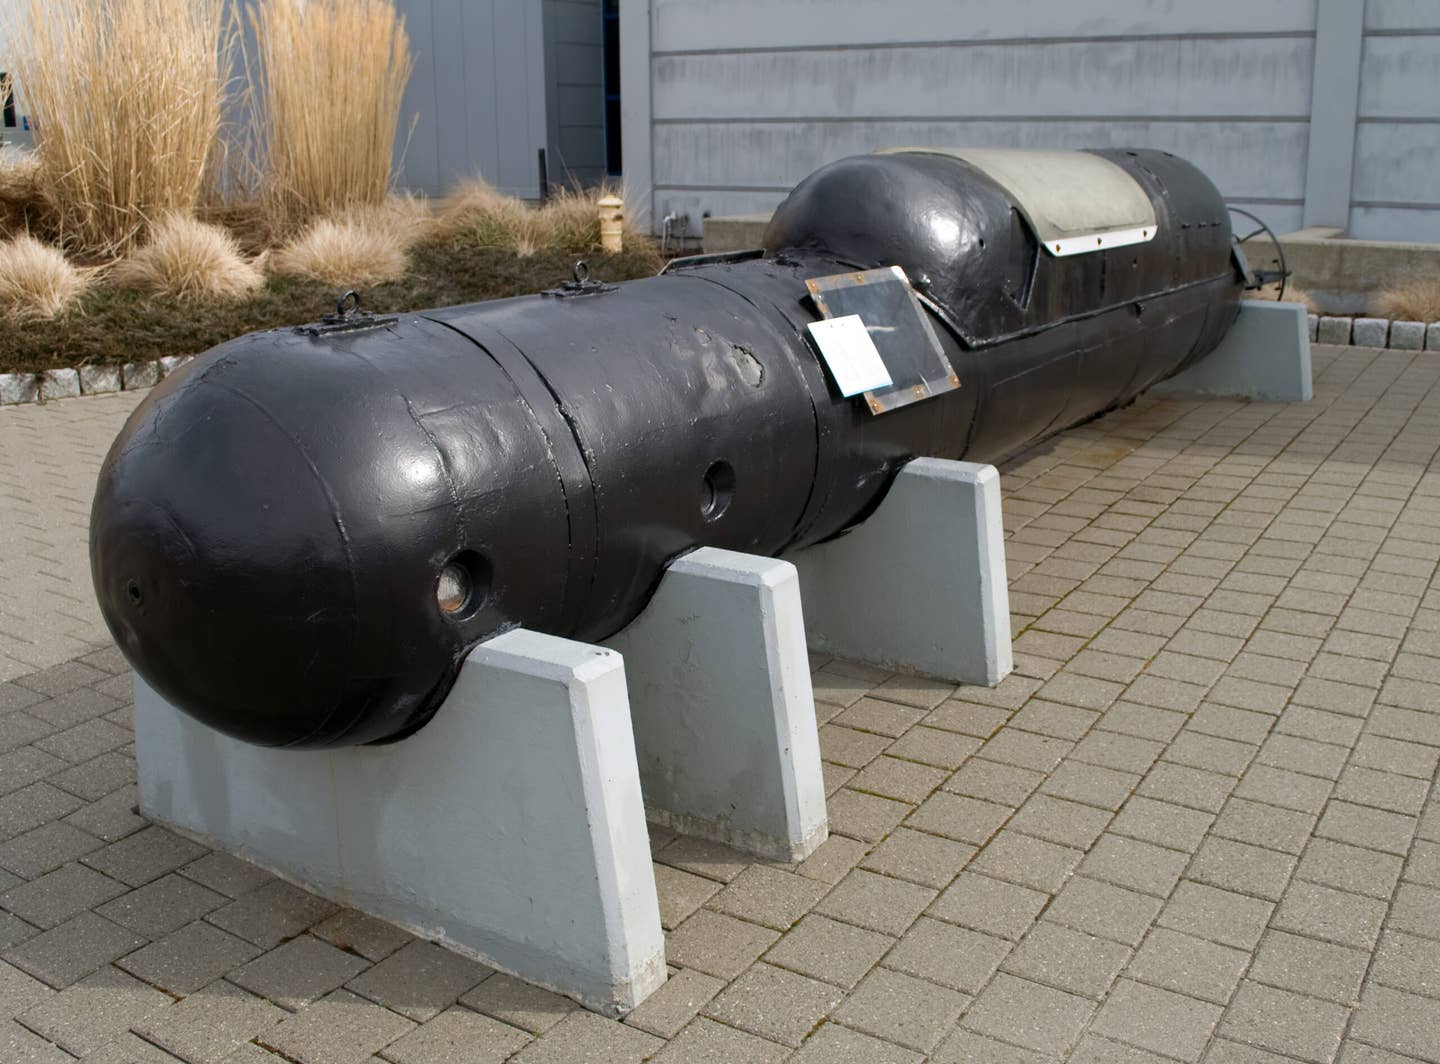 An Italian Maiale manned torpedo from World War II, at the U.S. Navy Submarine Force Museum and Library, Groton, Connecticut. <em>https://www.flickr.com/photos/divemasterking2000</em>